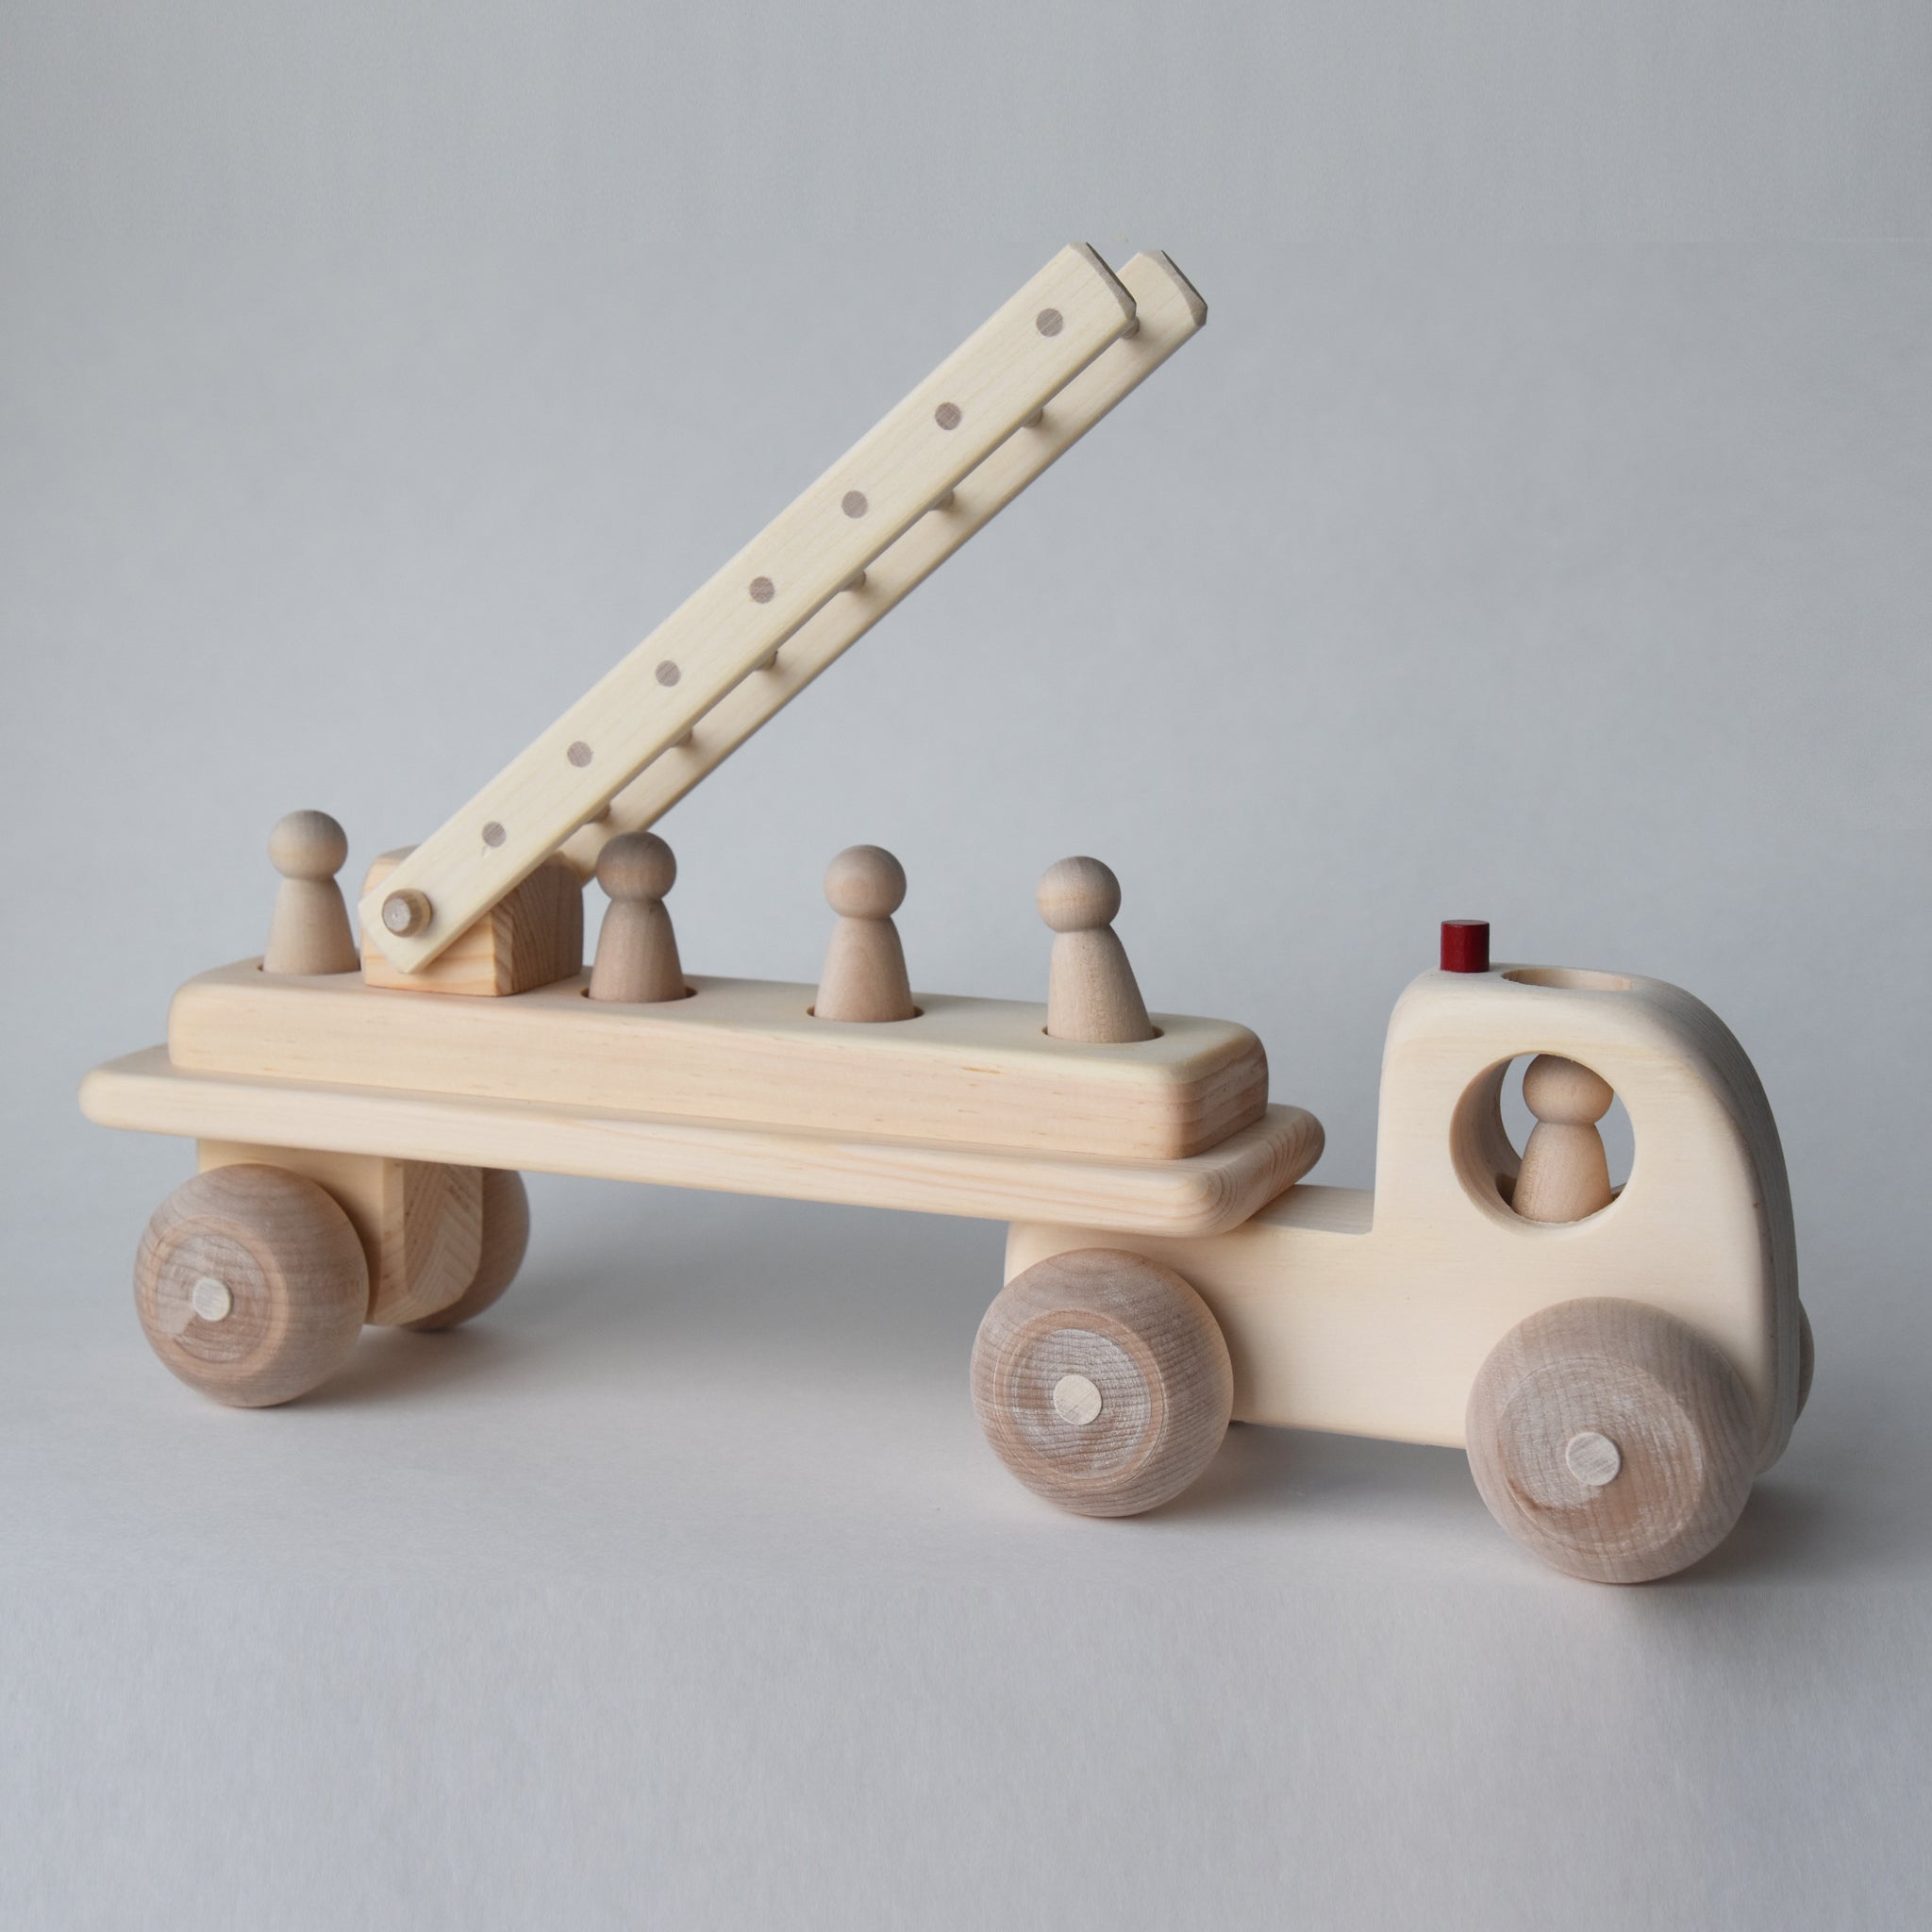 Handmade wooden fire engine toy with five removable peg people | Salt Air Supply